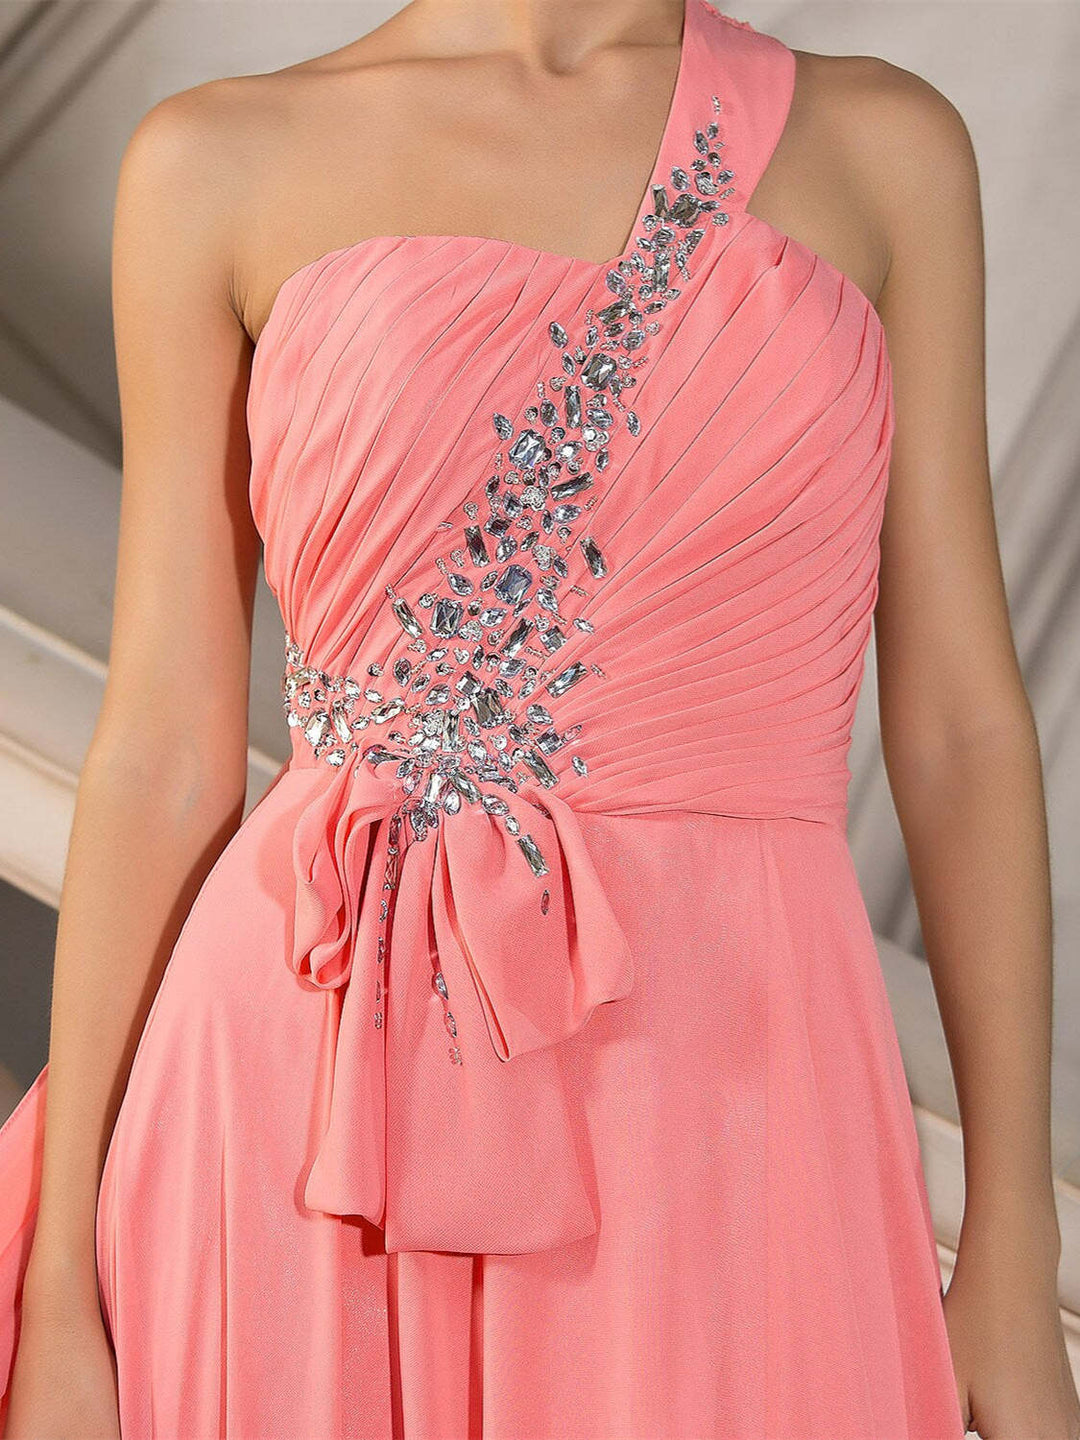 A-Line/Princess One Shoulder Court Train Evening Dresses with Crystals Draping